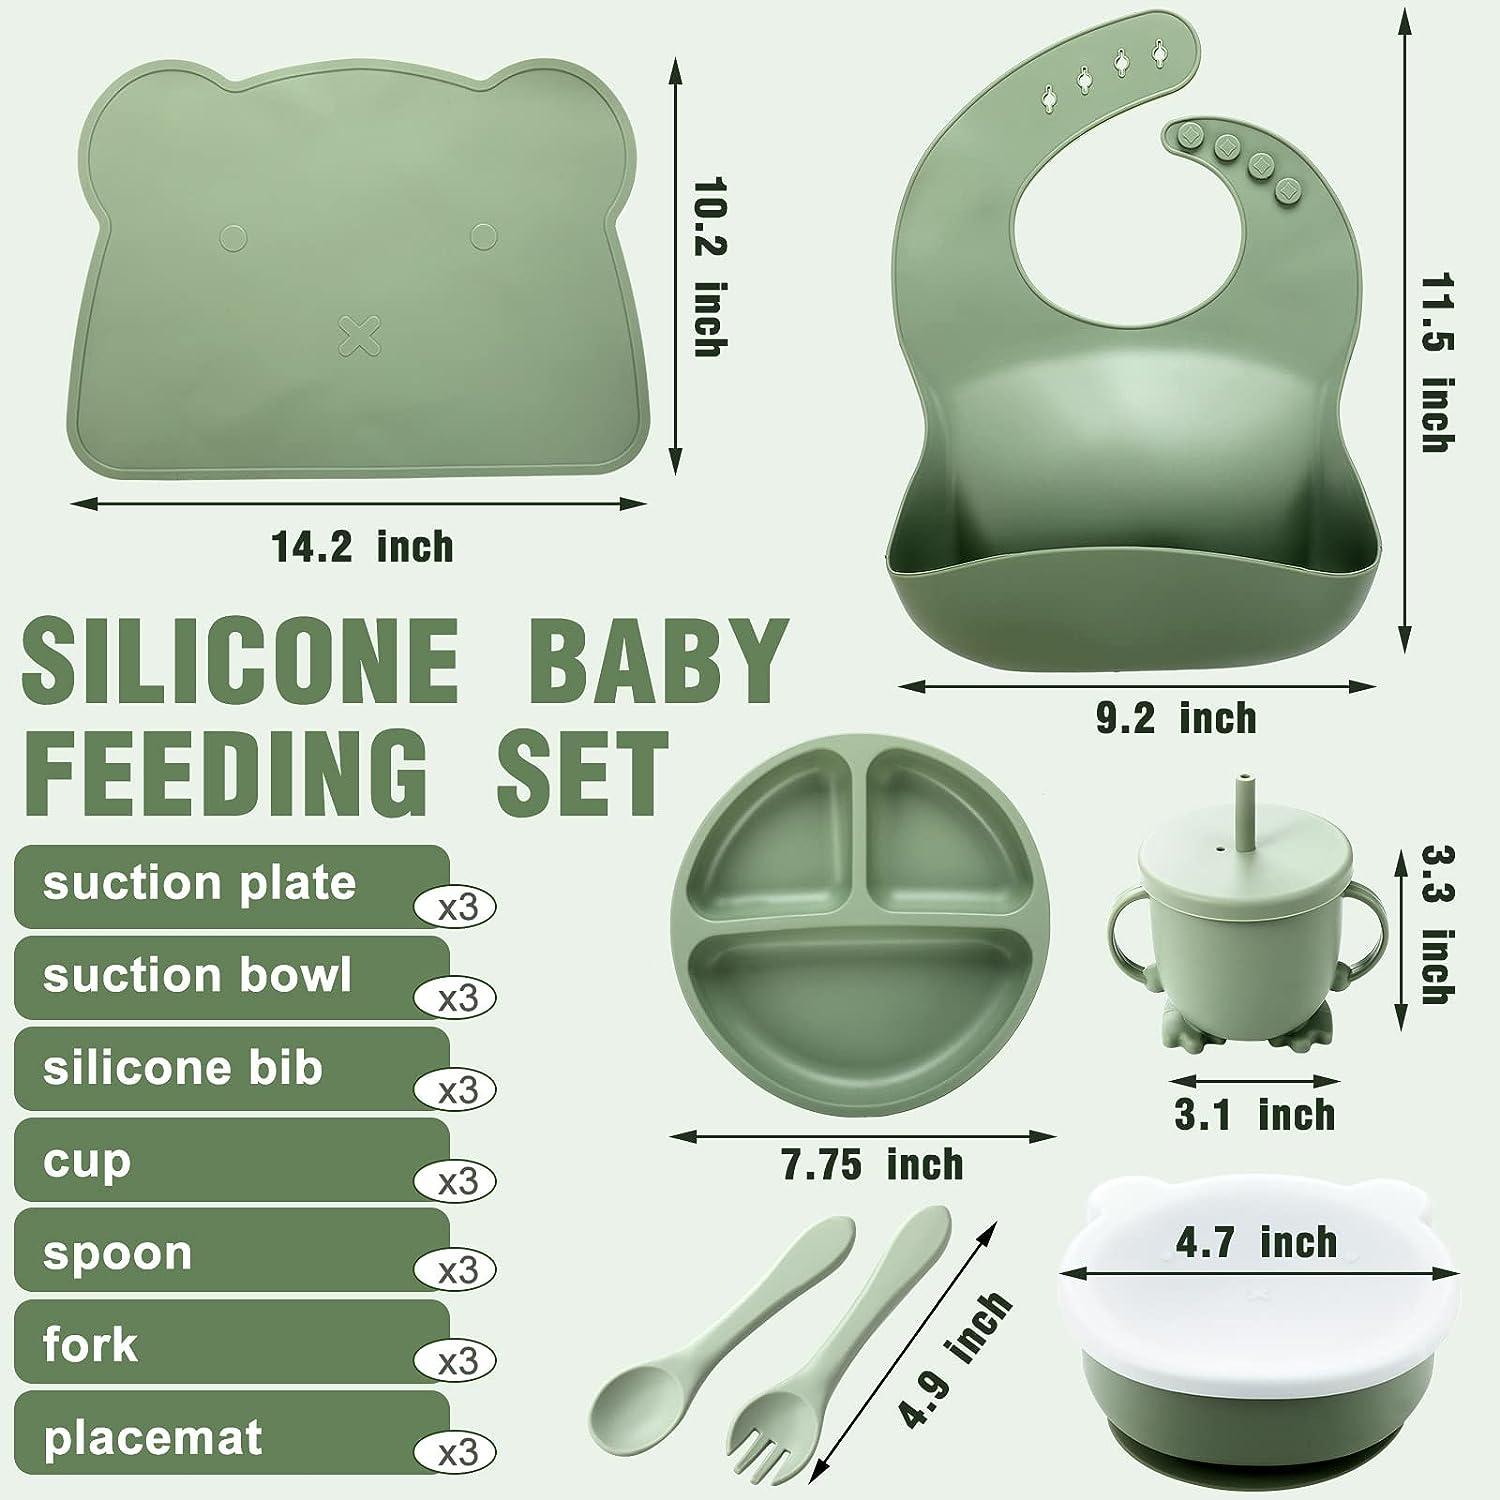 Baby Silicone Feeding Set - Baby Led Weaning Utensils, Silicone Bibs,  Infant Feeding Cups Toddlers Smooth Material For Practical Eating, Set of 8